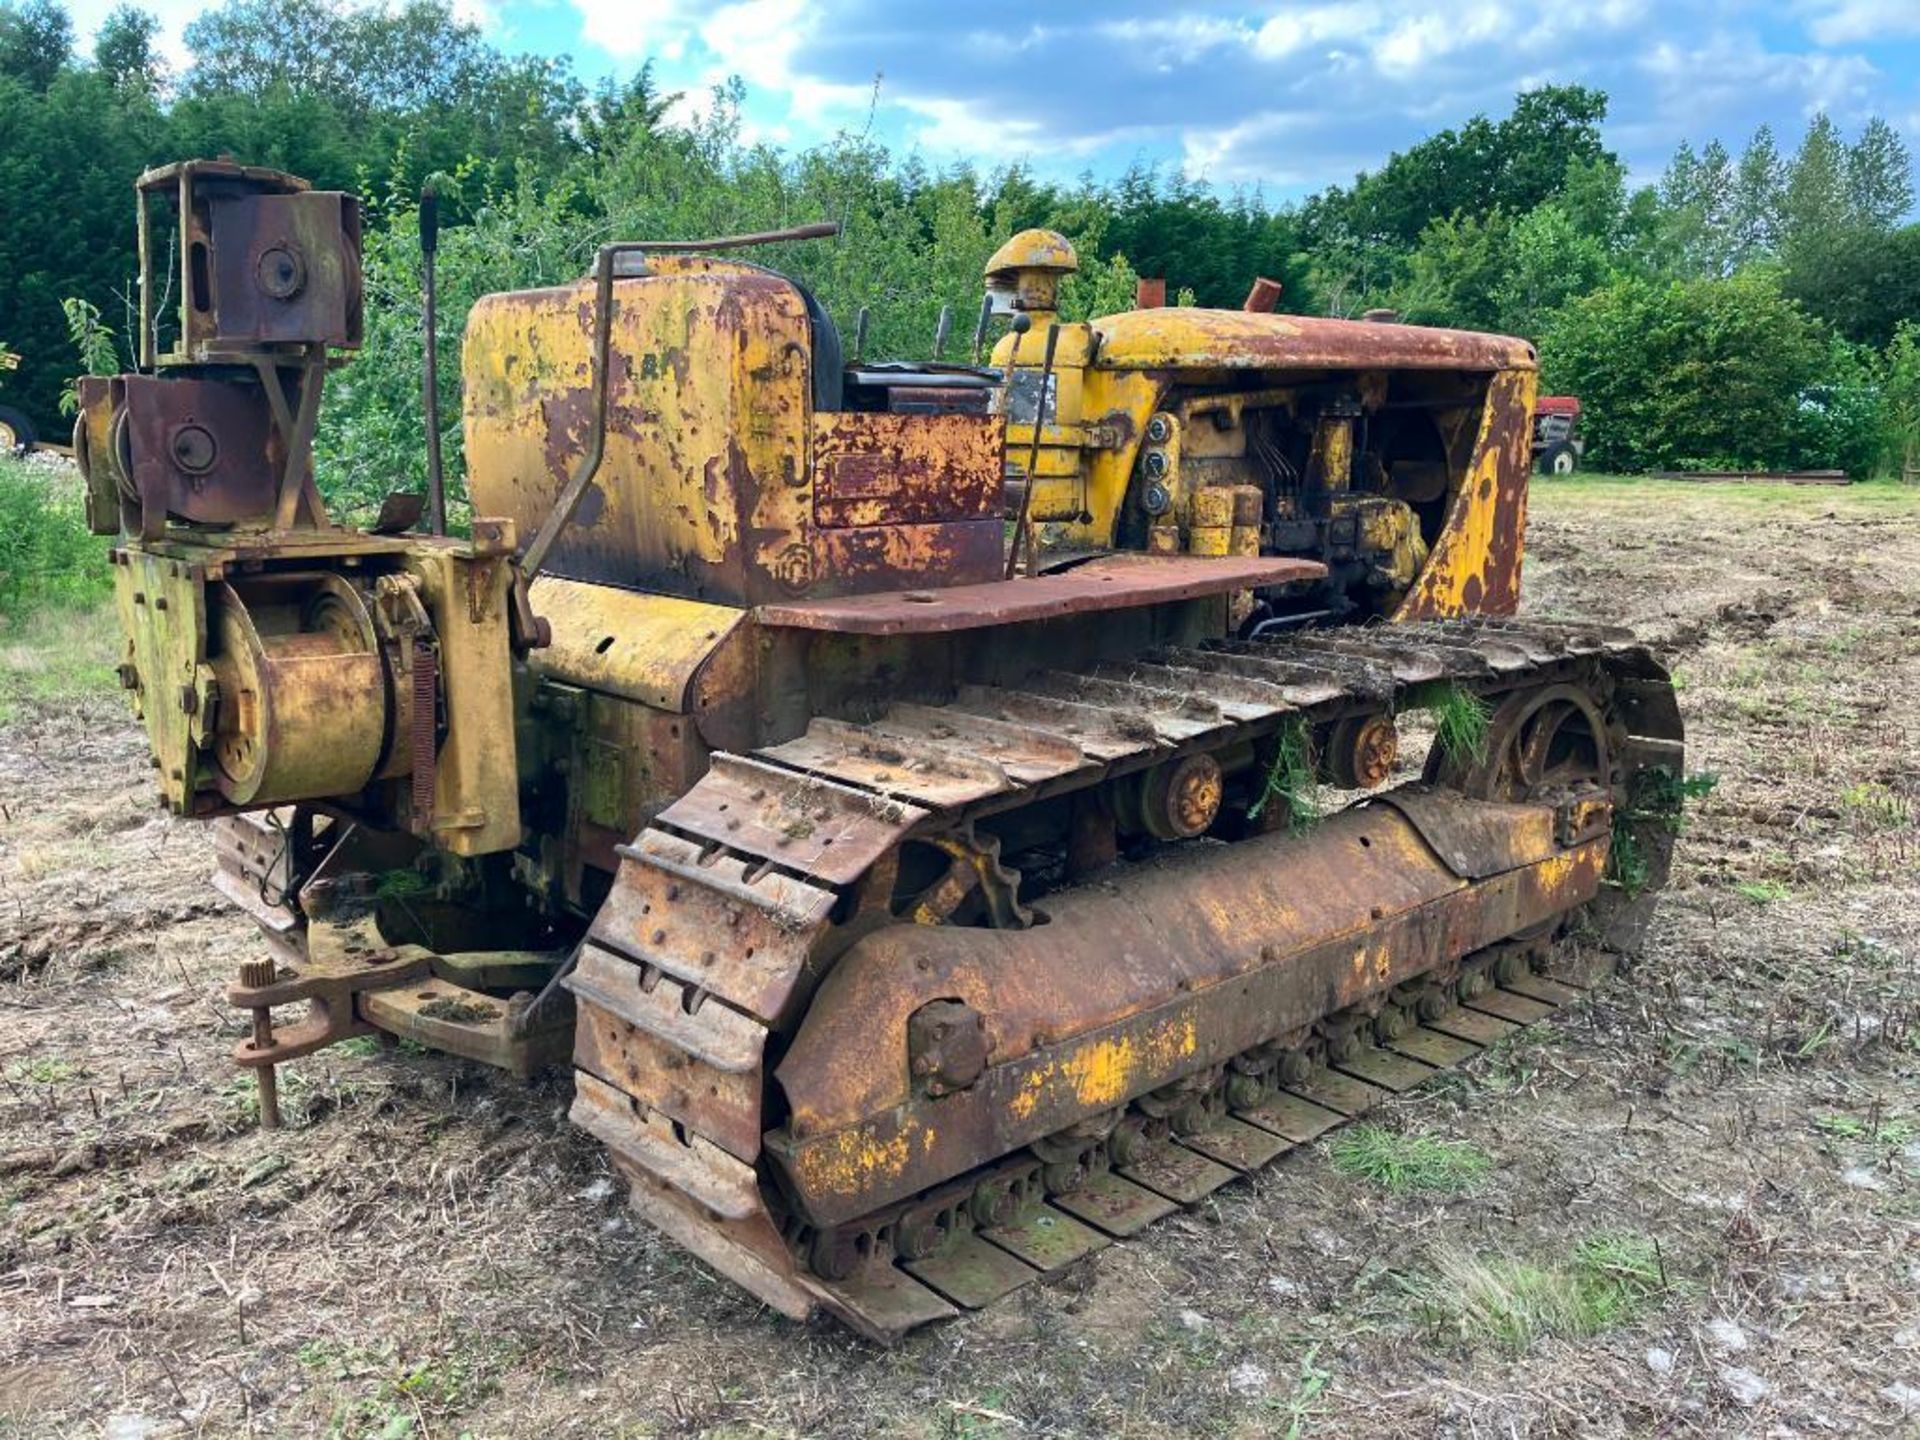 Caterpillar D7 metal tracked crawler with 22" tracks, rear swinging drawbar and rear cable winch - Image 15 of 16